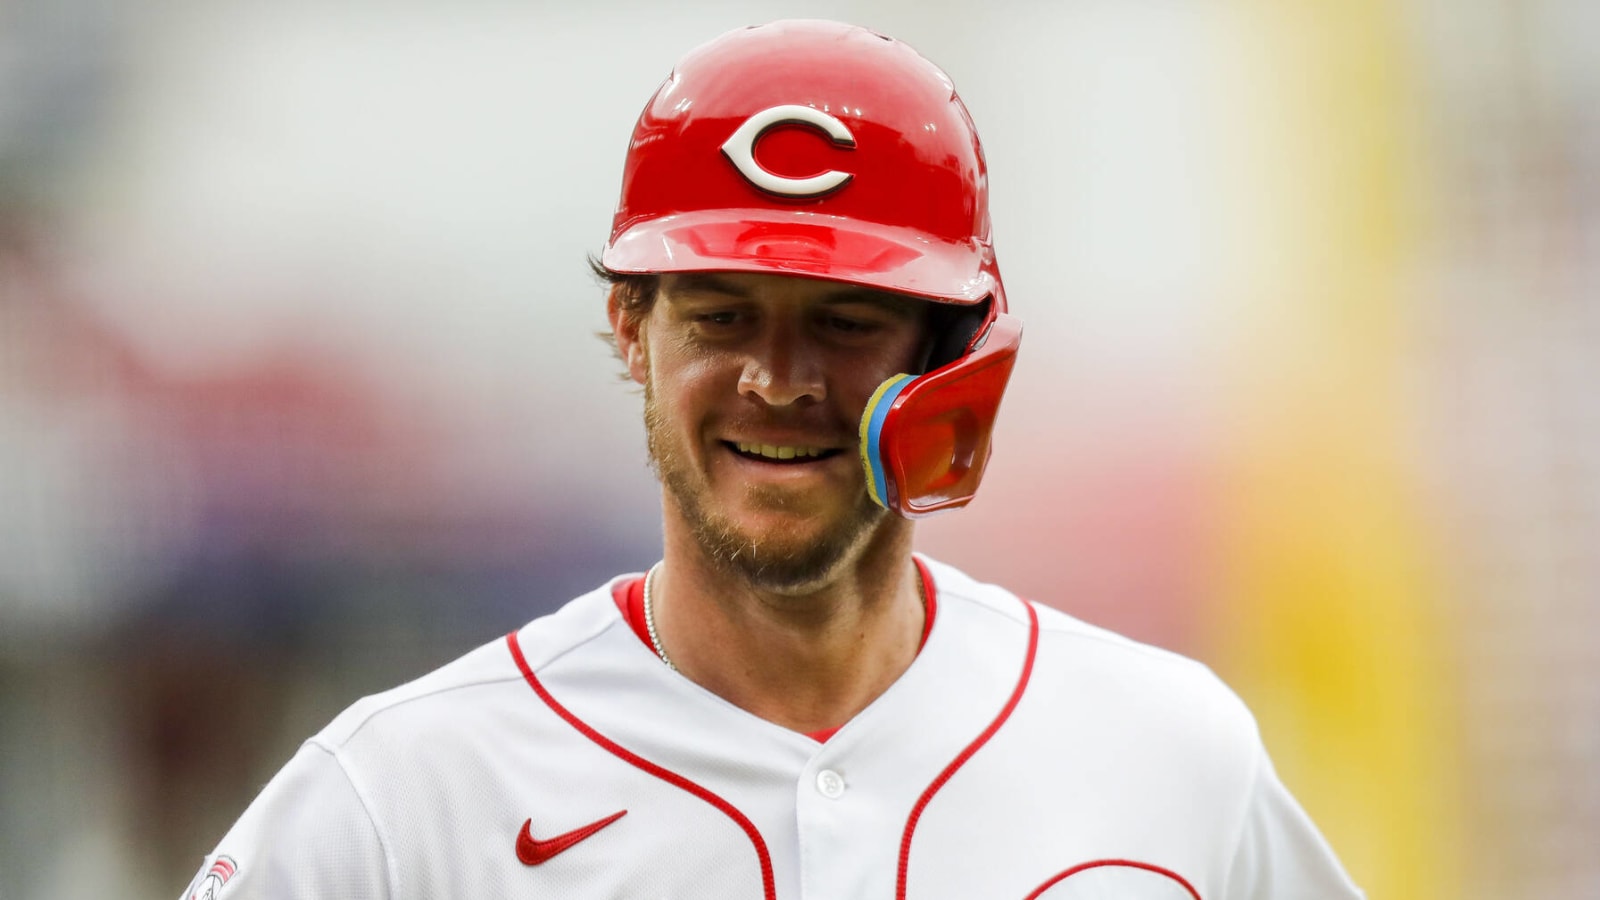 Reds reinstate, then DFA former MLB All-Star